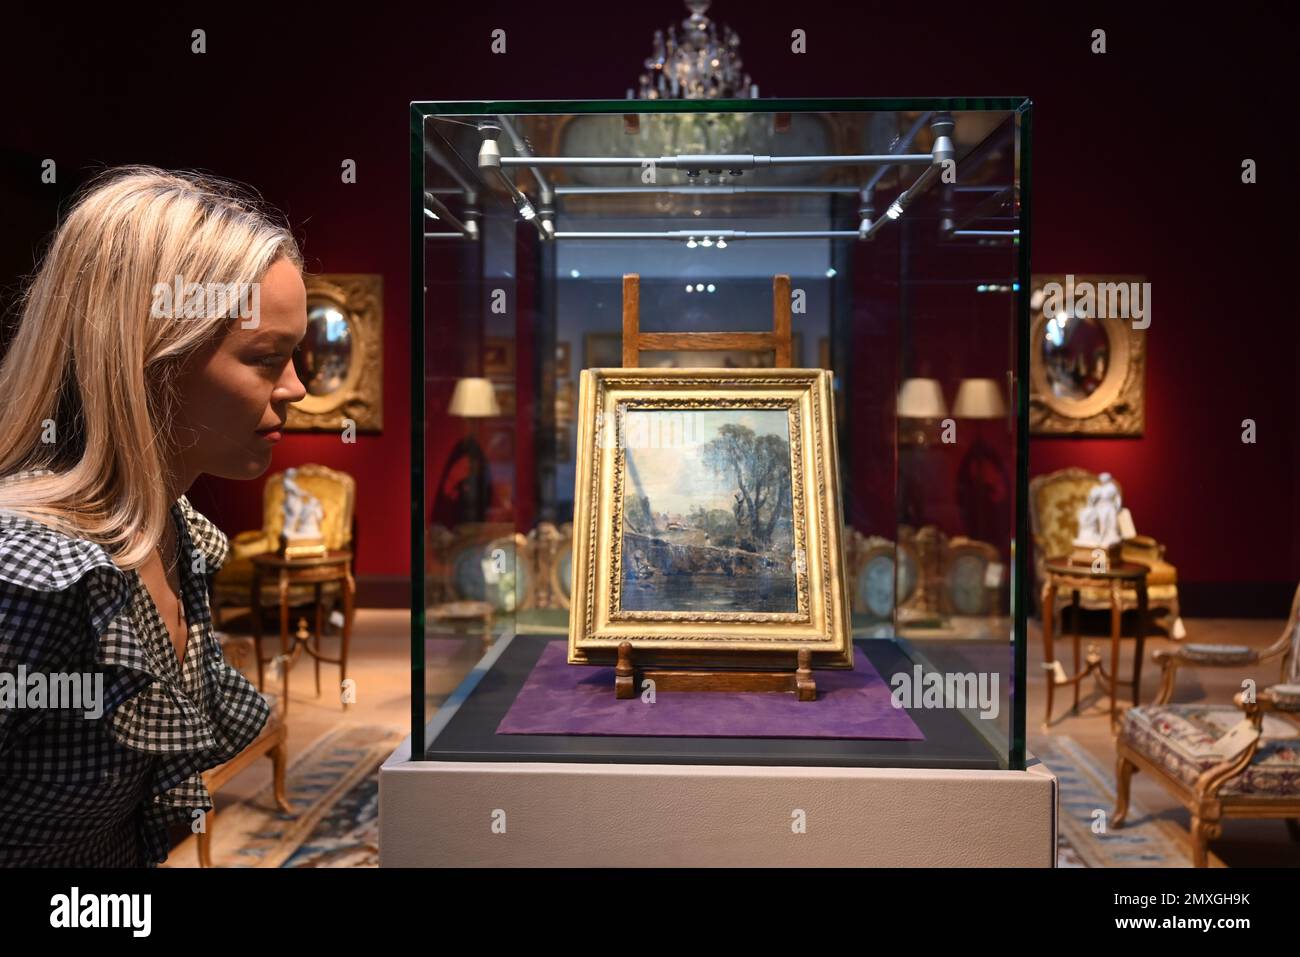 London – On 9 February, Christie’s will offer An Opulent Aesthetic: An Important Private Collection from an English Country House in a live auction. Presenting an opulent reinterpretation of the traditional country house style, the sale comprises 266 lots. The collector’s notable connoisseurship and taste is evident in the distinctive mise-en-scène they created; the house provided a luxurious retreat from the city, where friends were entertained on a grand scale. Spanning 19th century and Old Master paintings to fine furniture, clocks, porcelain,,silver , soft furnishings and lighting . Stock Photo